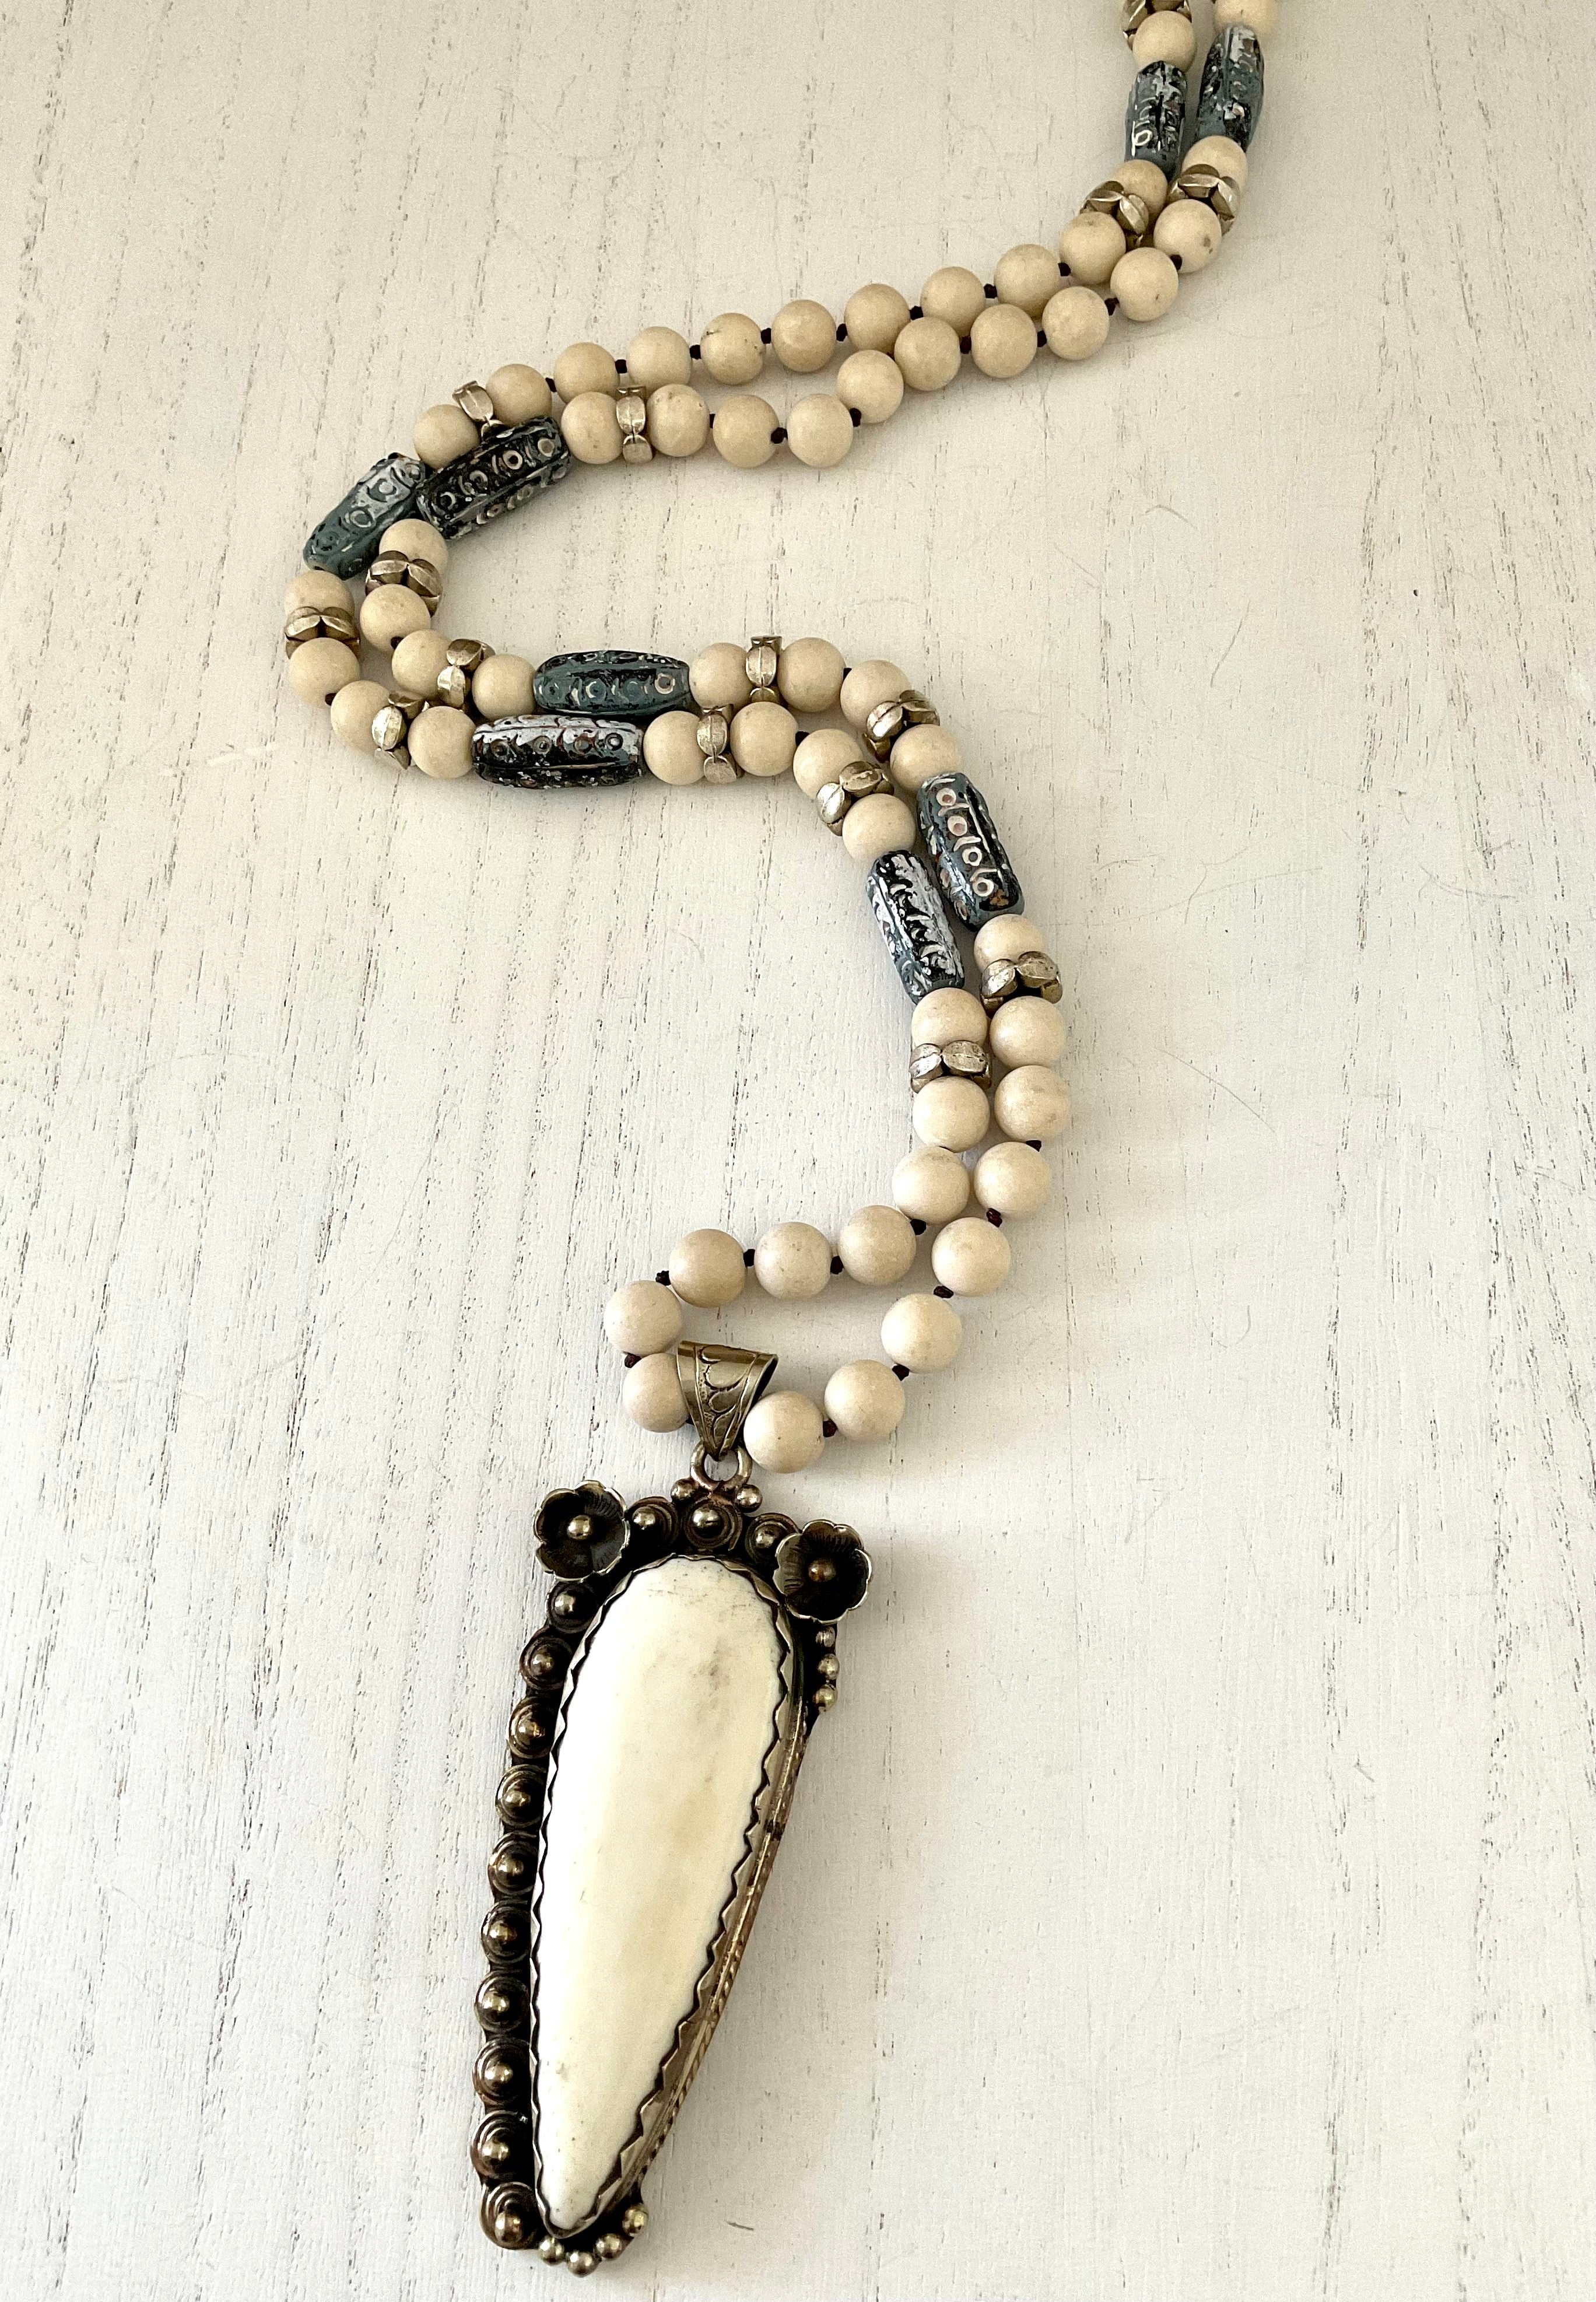 Hand Knotted Beaded Necklace with Tibetan Bone Pendant